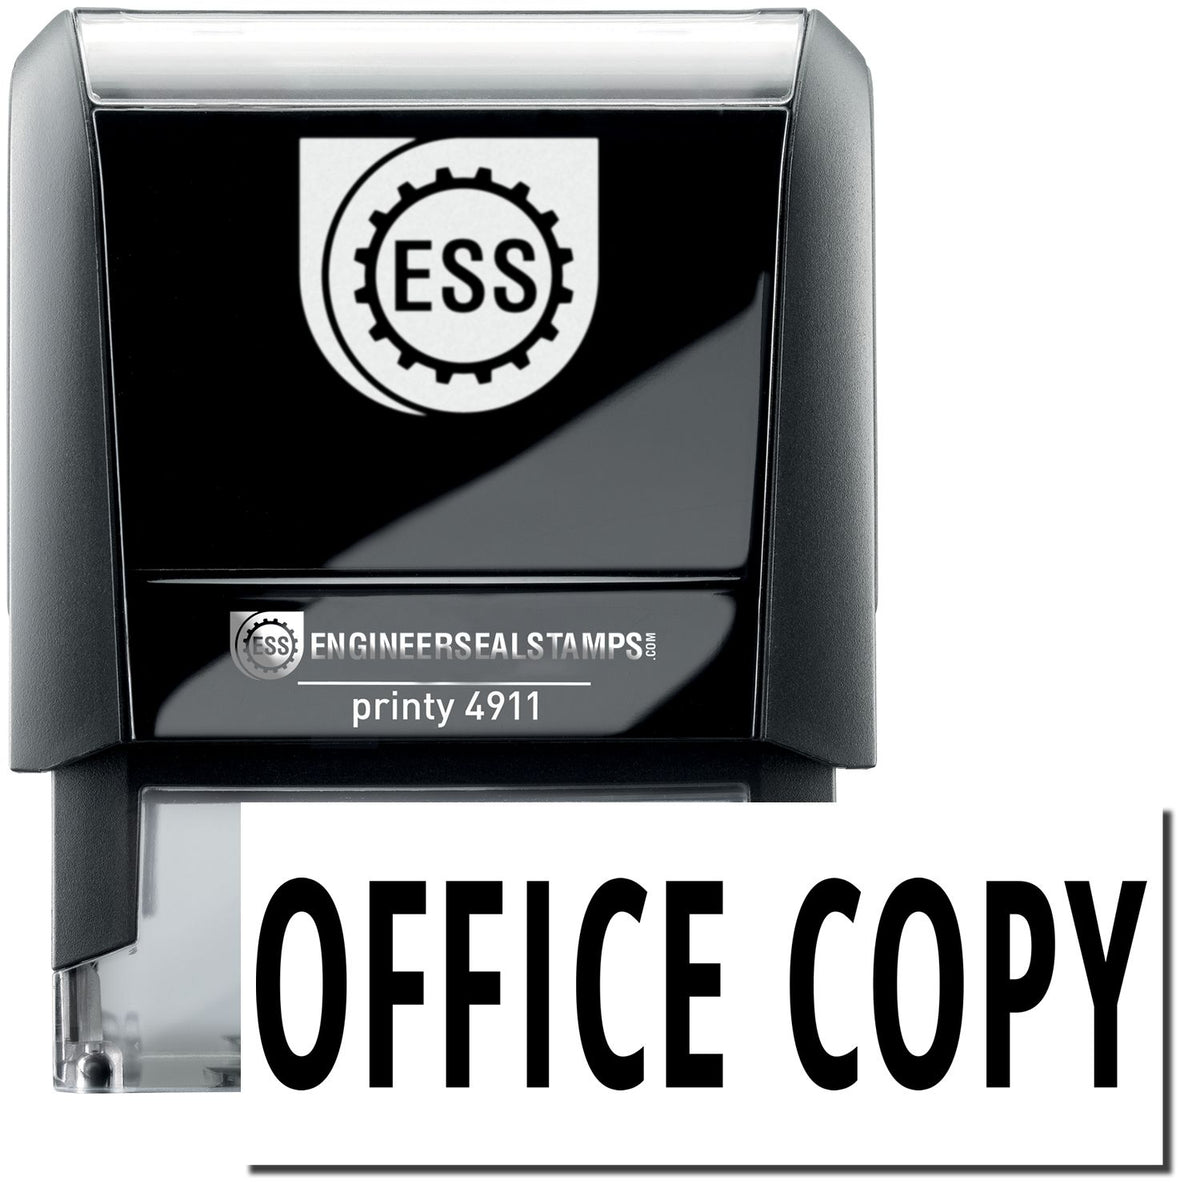 A self-inking stamp with a stamped image showing how the text &quot;OFFICE COPY&quot; is displayed after stamping.